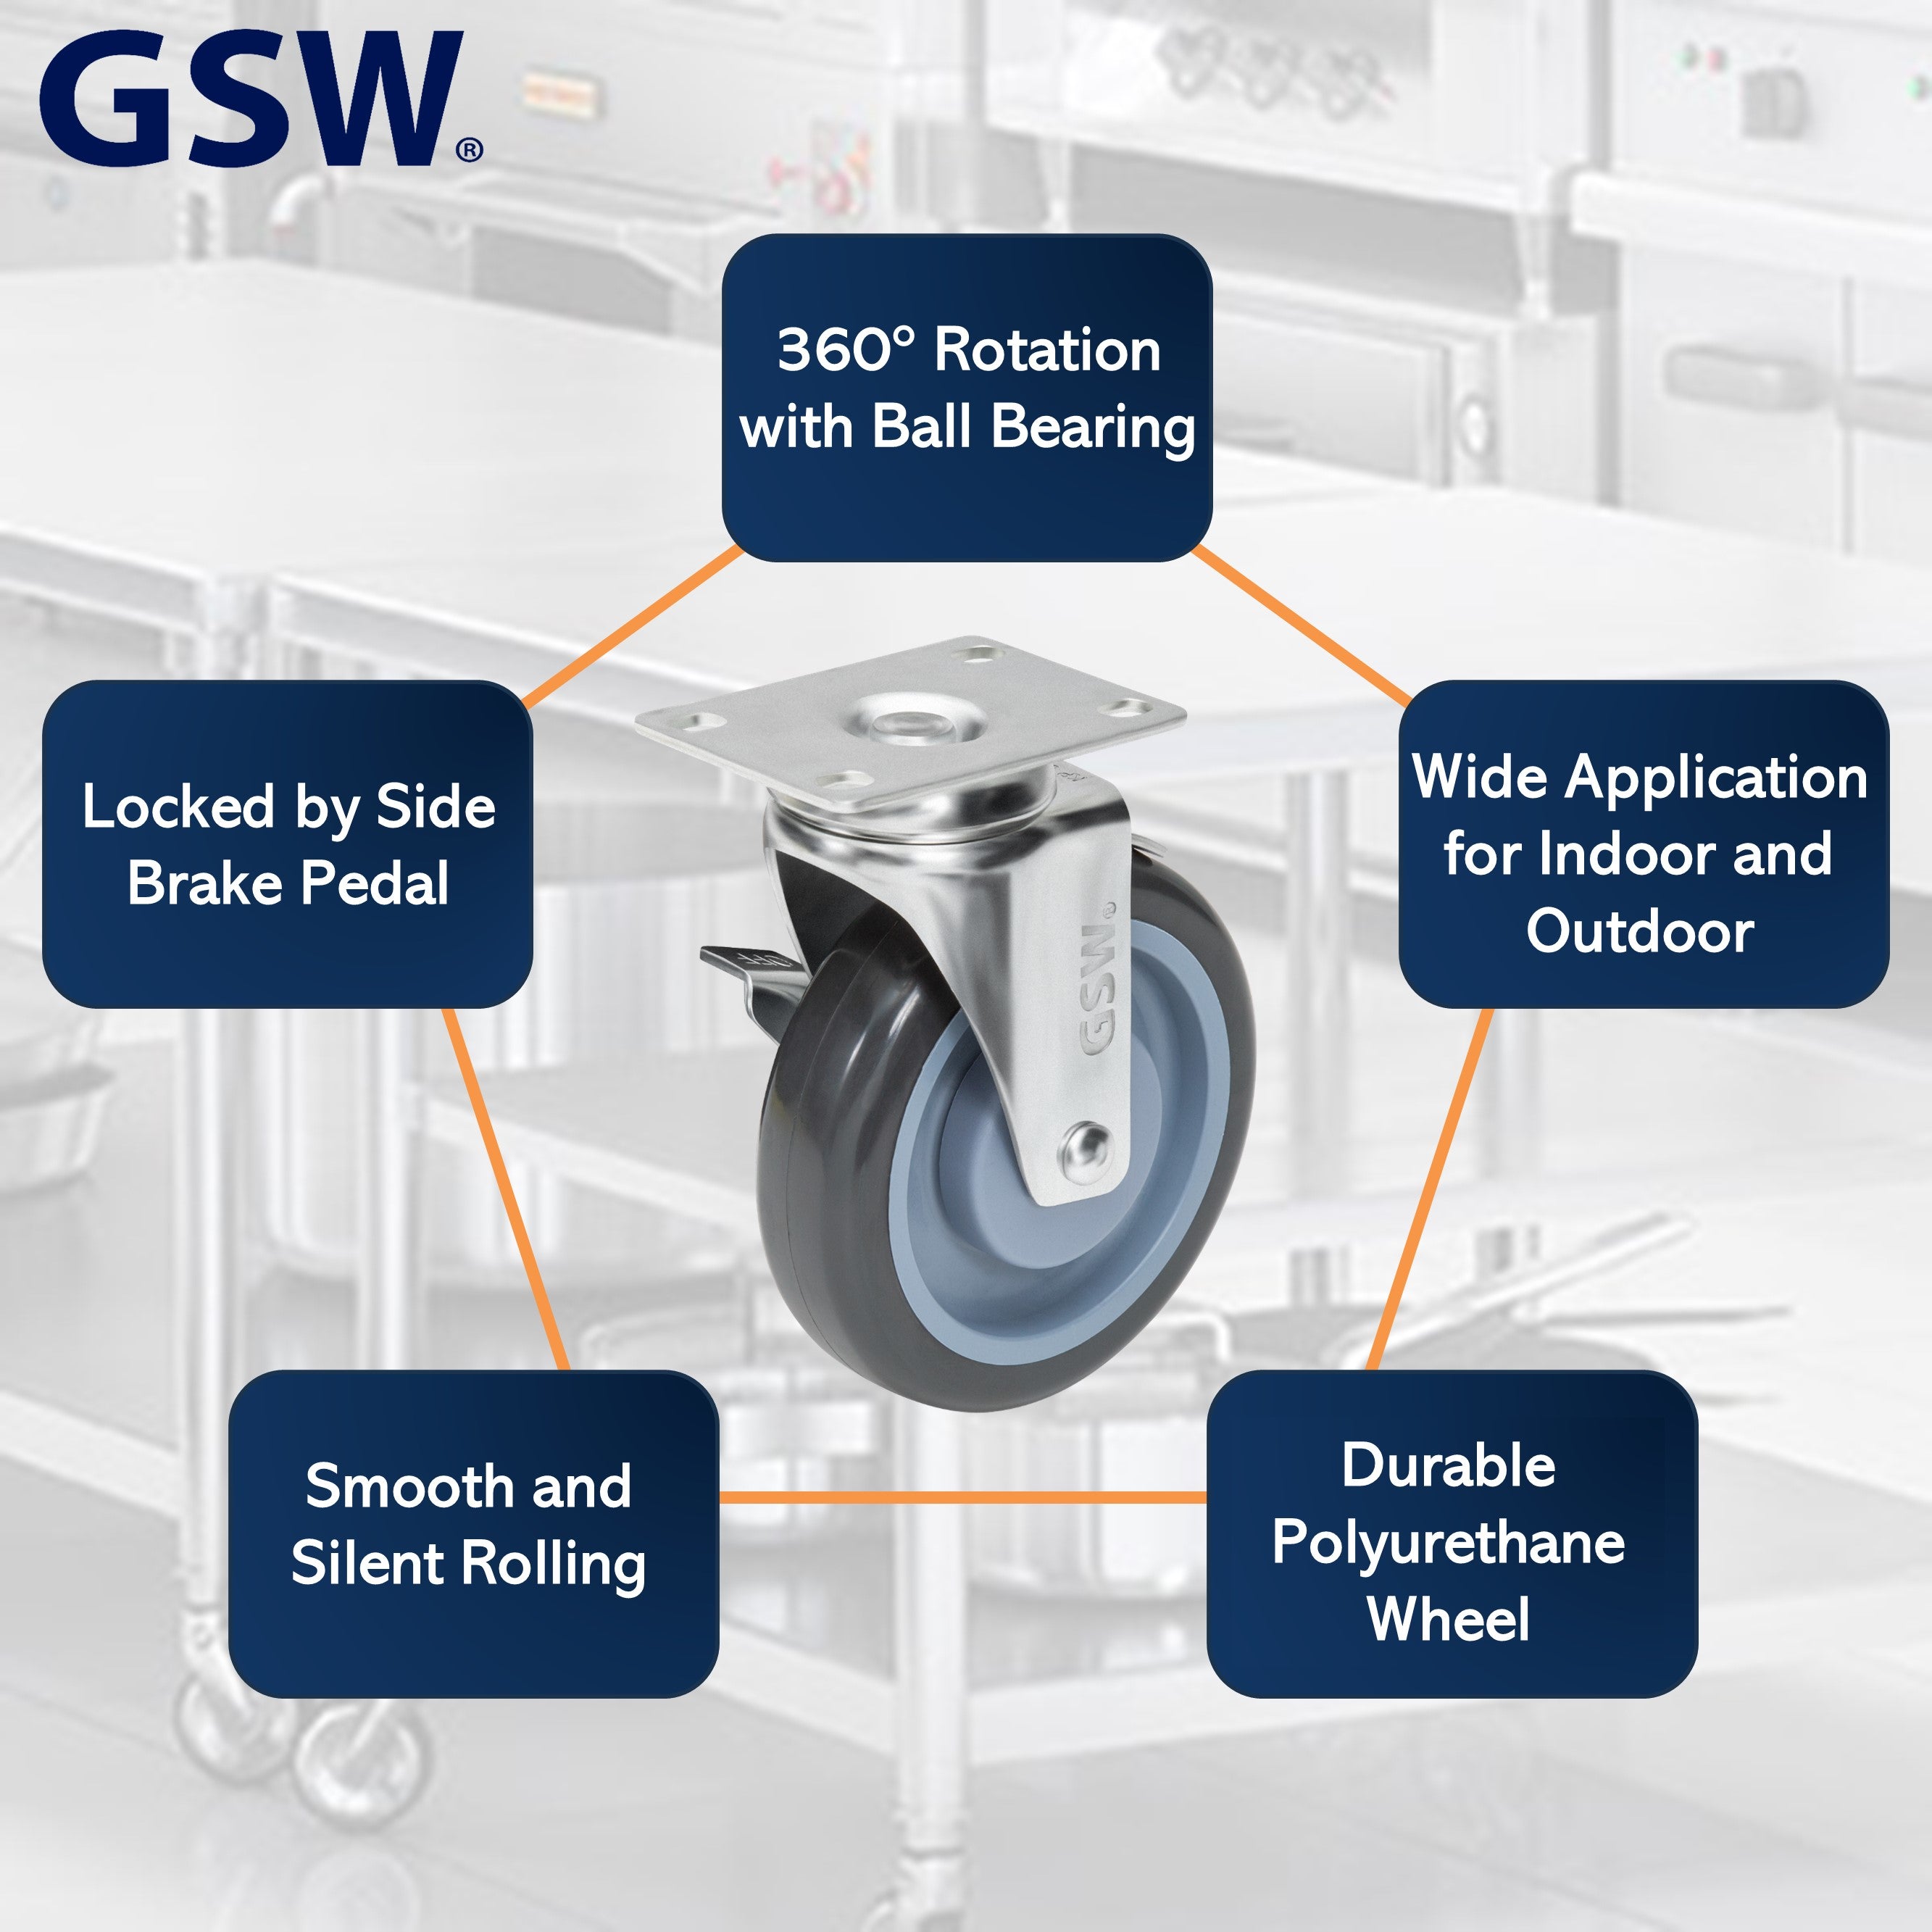 GSW 2" Plate Caster Set of 4, Industrial Casters with Capacity 600 LBs, Heavy Duty Casters - Use for Inventory Carts, Workbench, Platform Cart (Swivel with Brake)